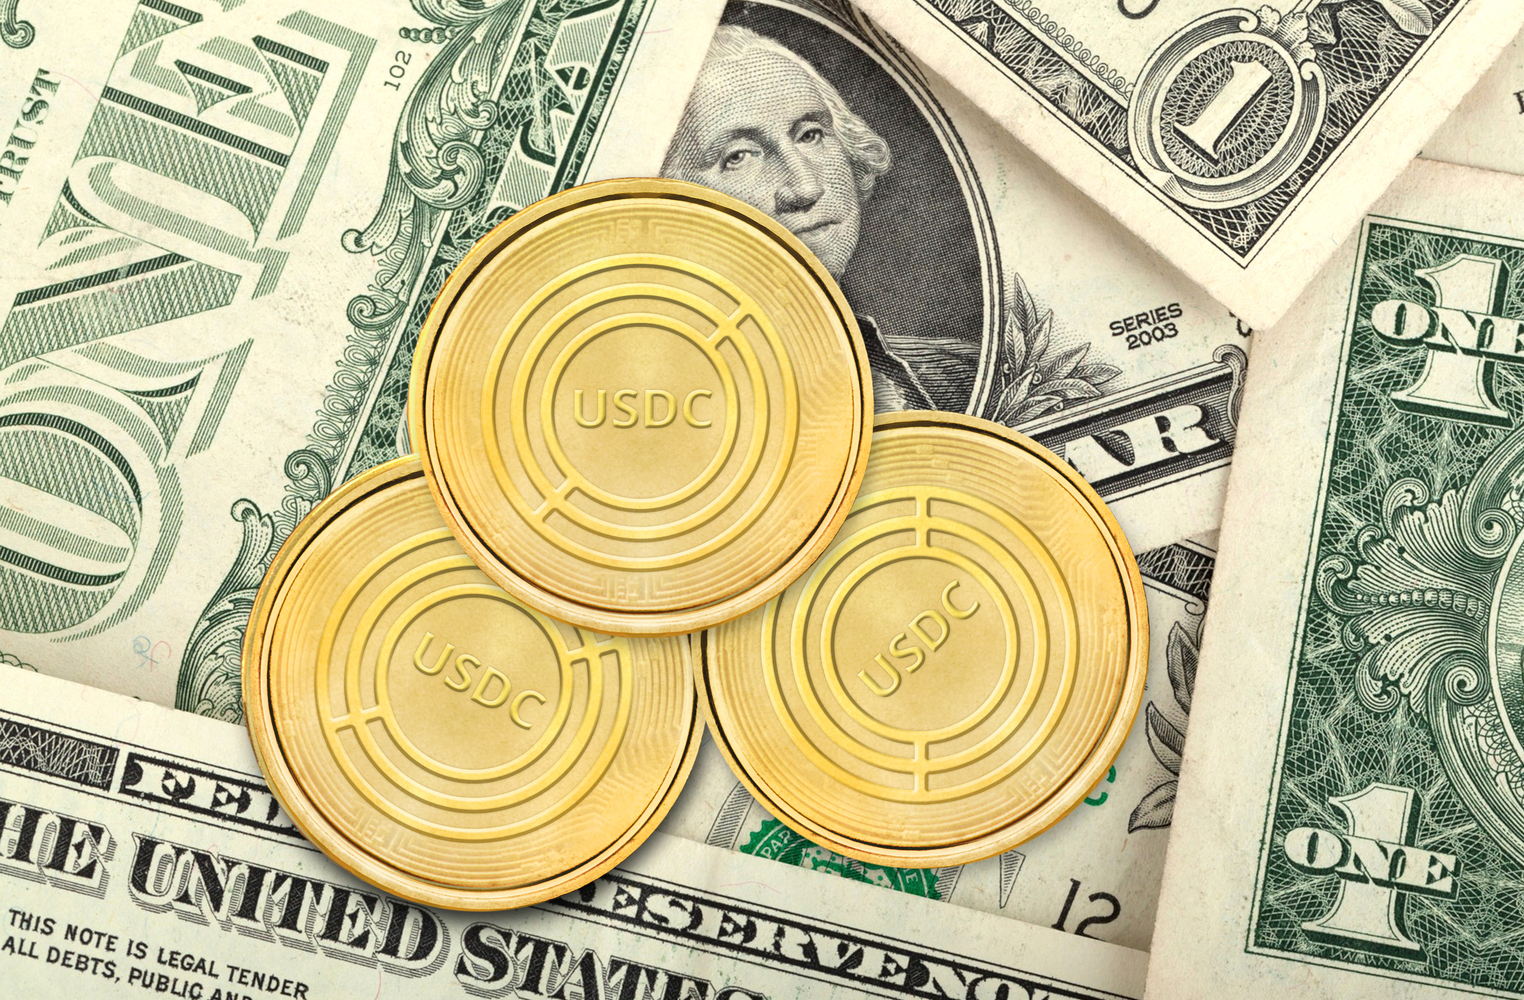 Stablecoins and Exchange Coins - What's the Difference From the Ol' Corporate Bond?